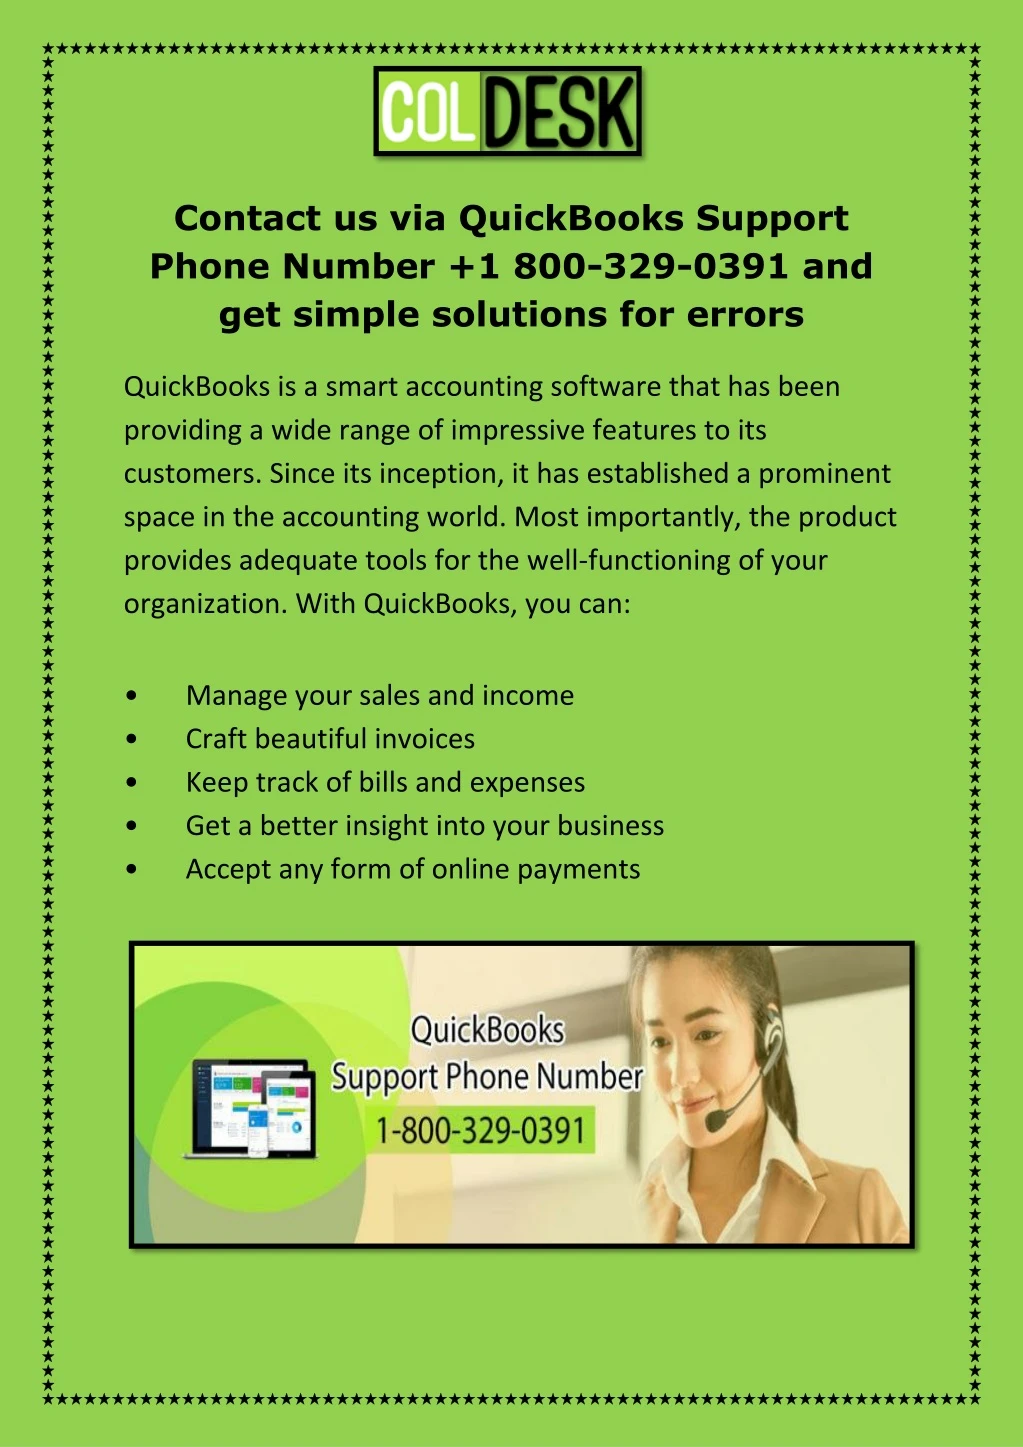 contact us via quickbooks support phone number